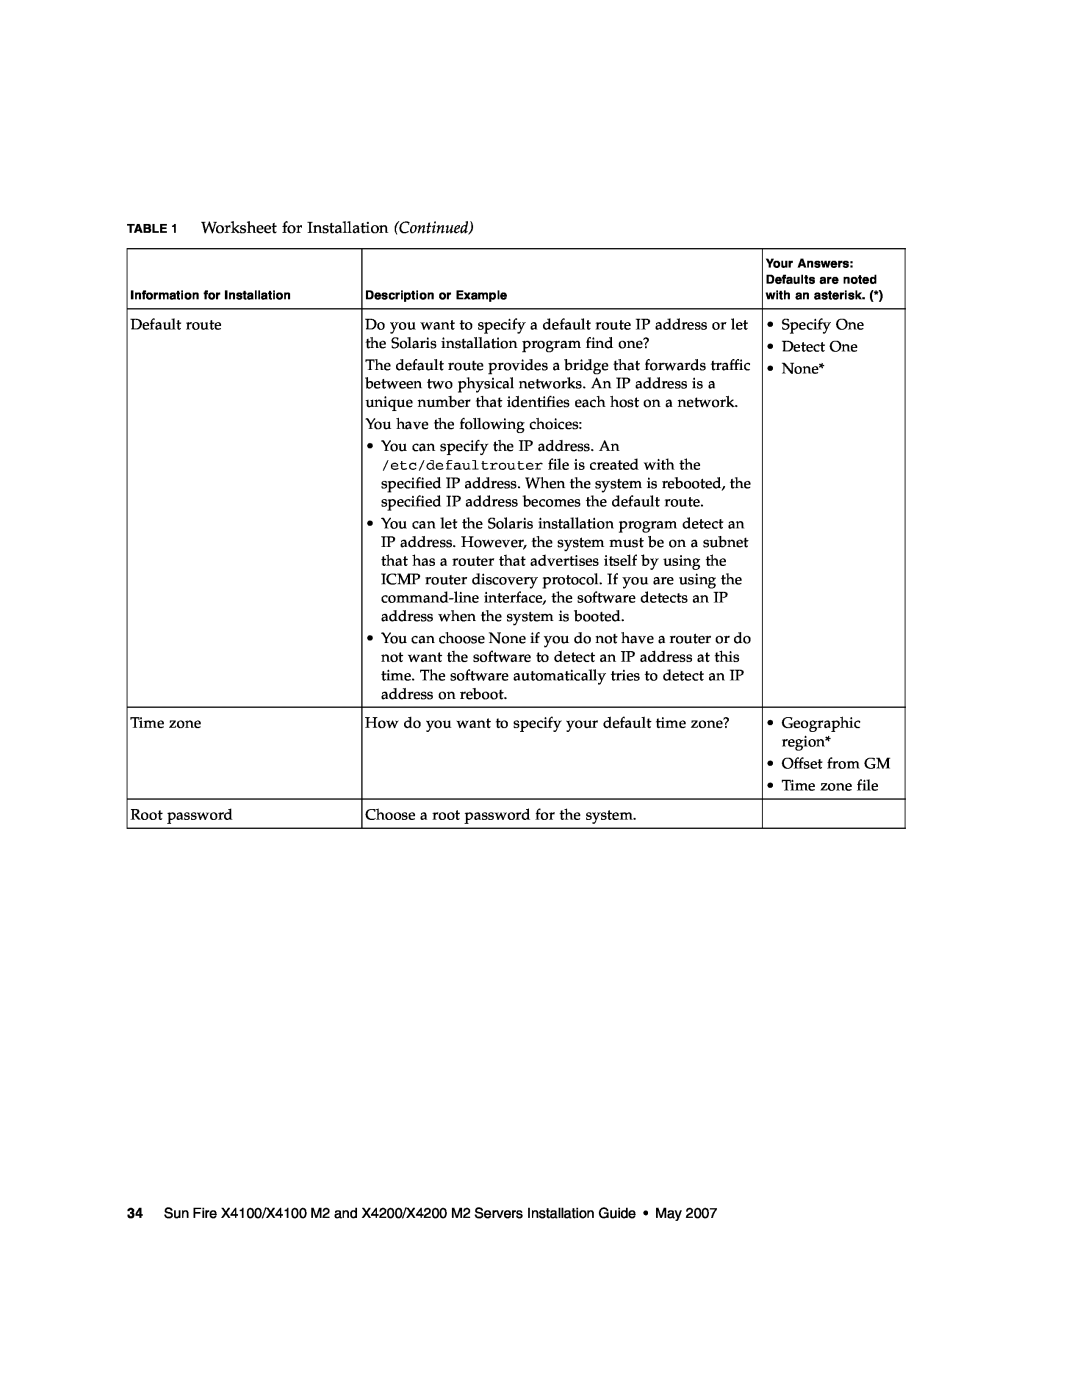 Sun Microsystems X4200 M2, X4100 M2 manual Worksheet for Installation Continued 